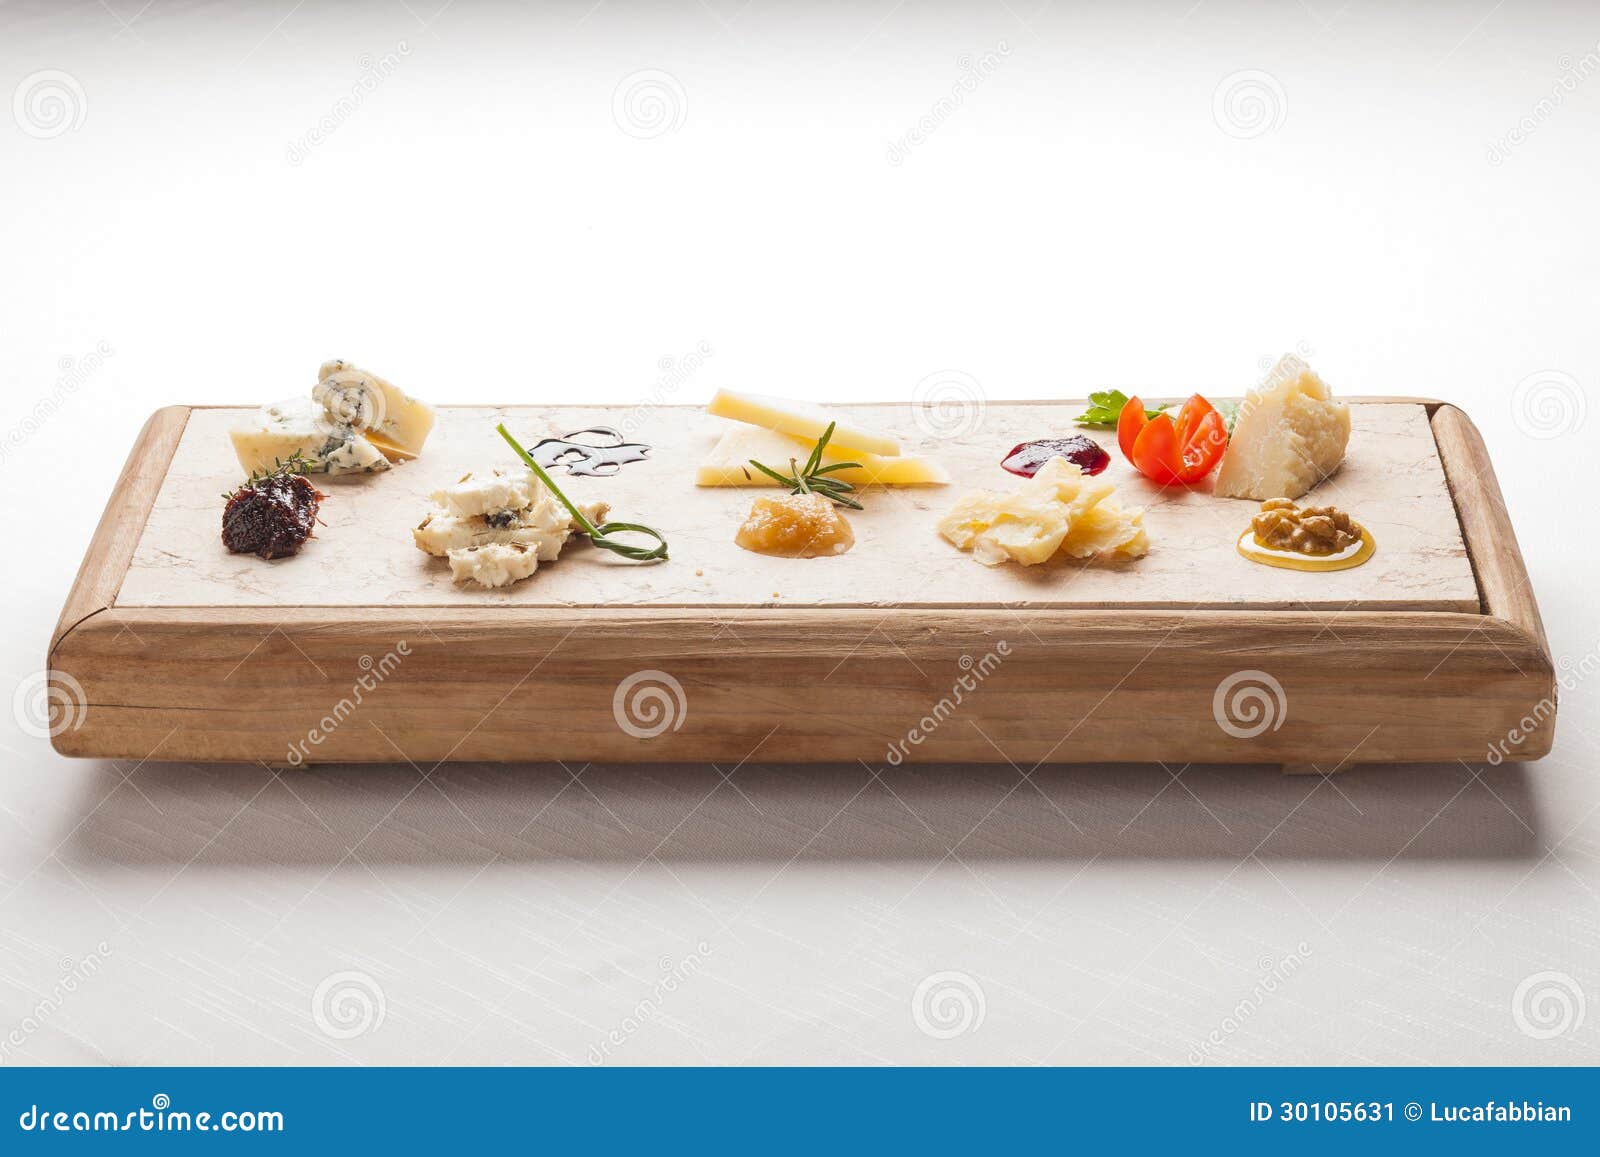 cheeseboard with italian cheeses ready for degustation. gourmet